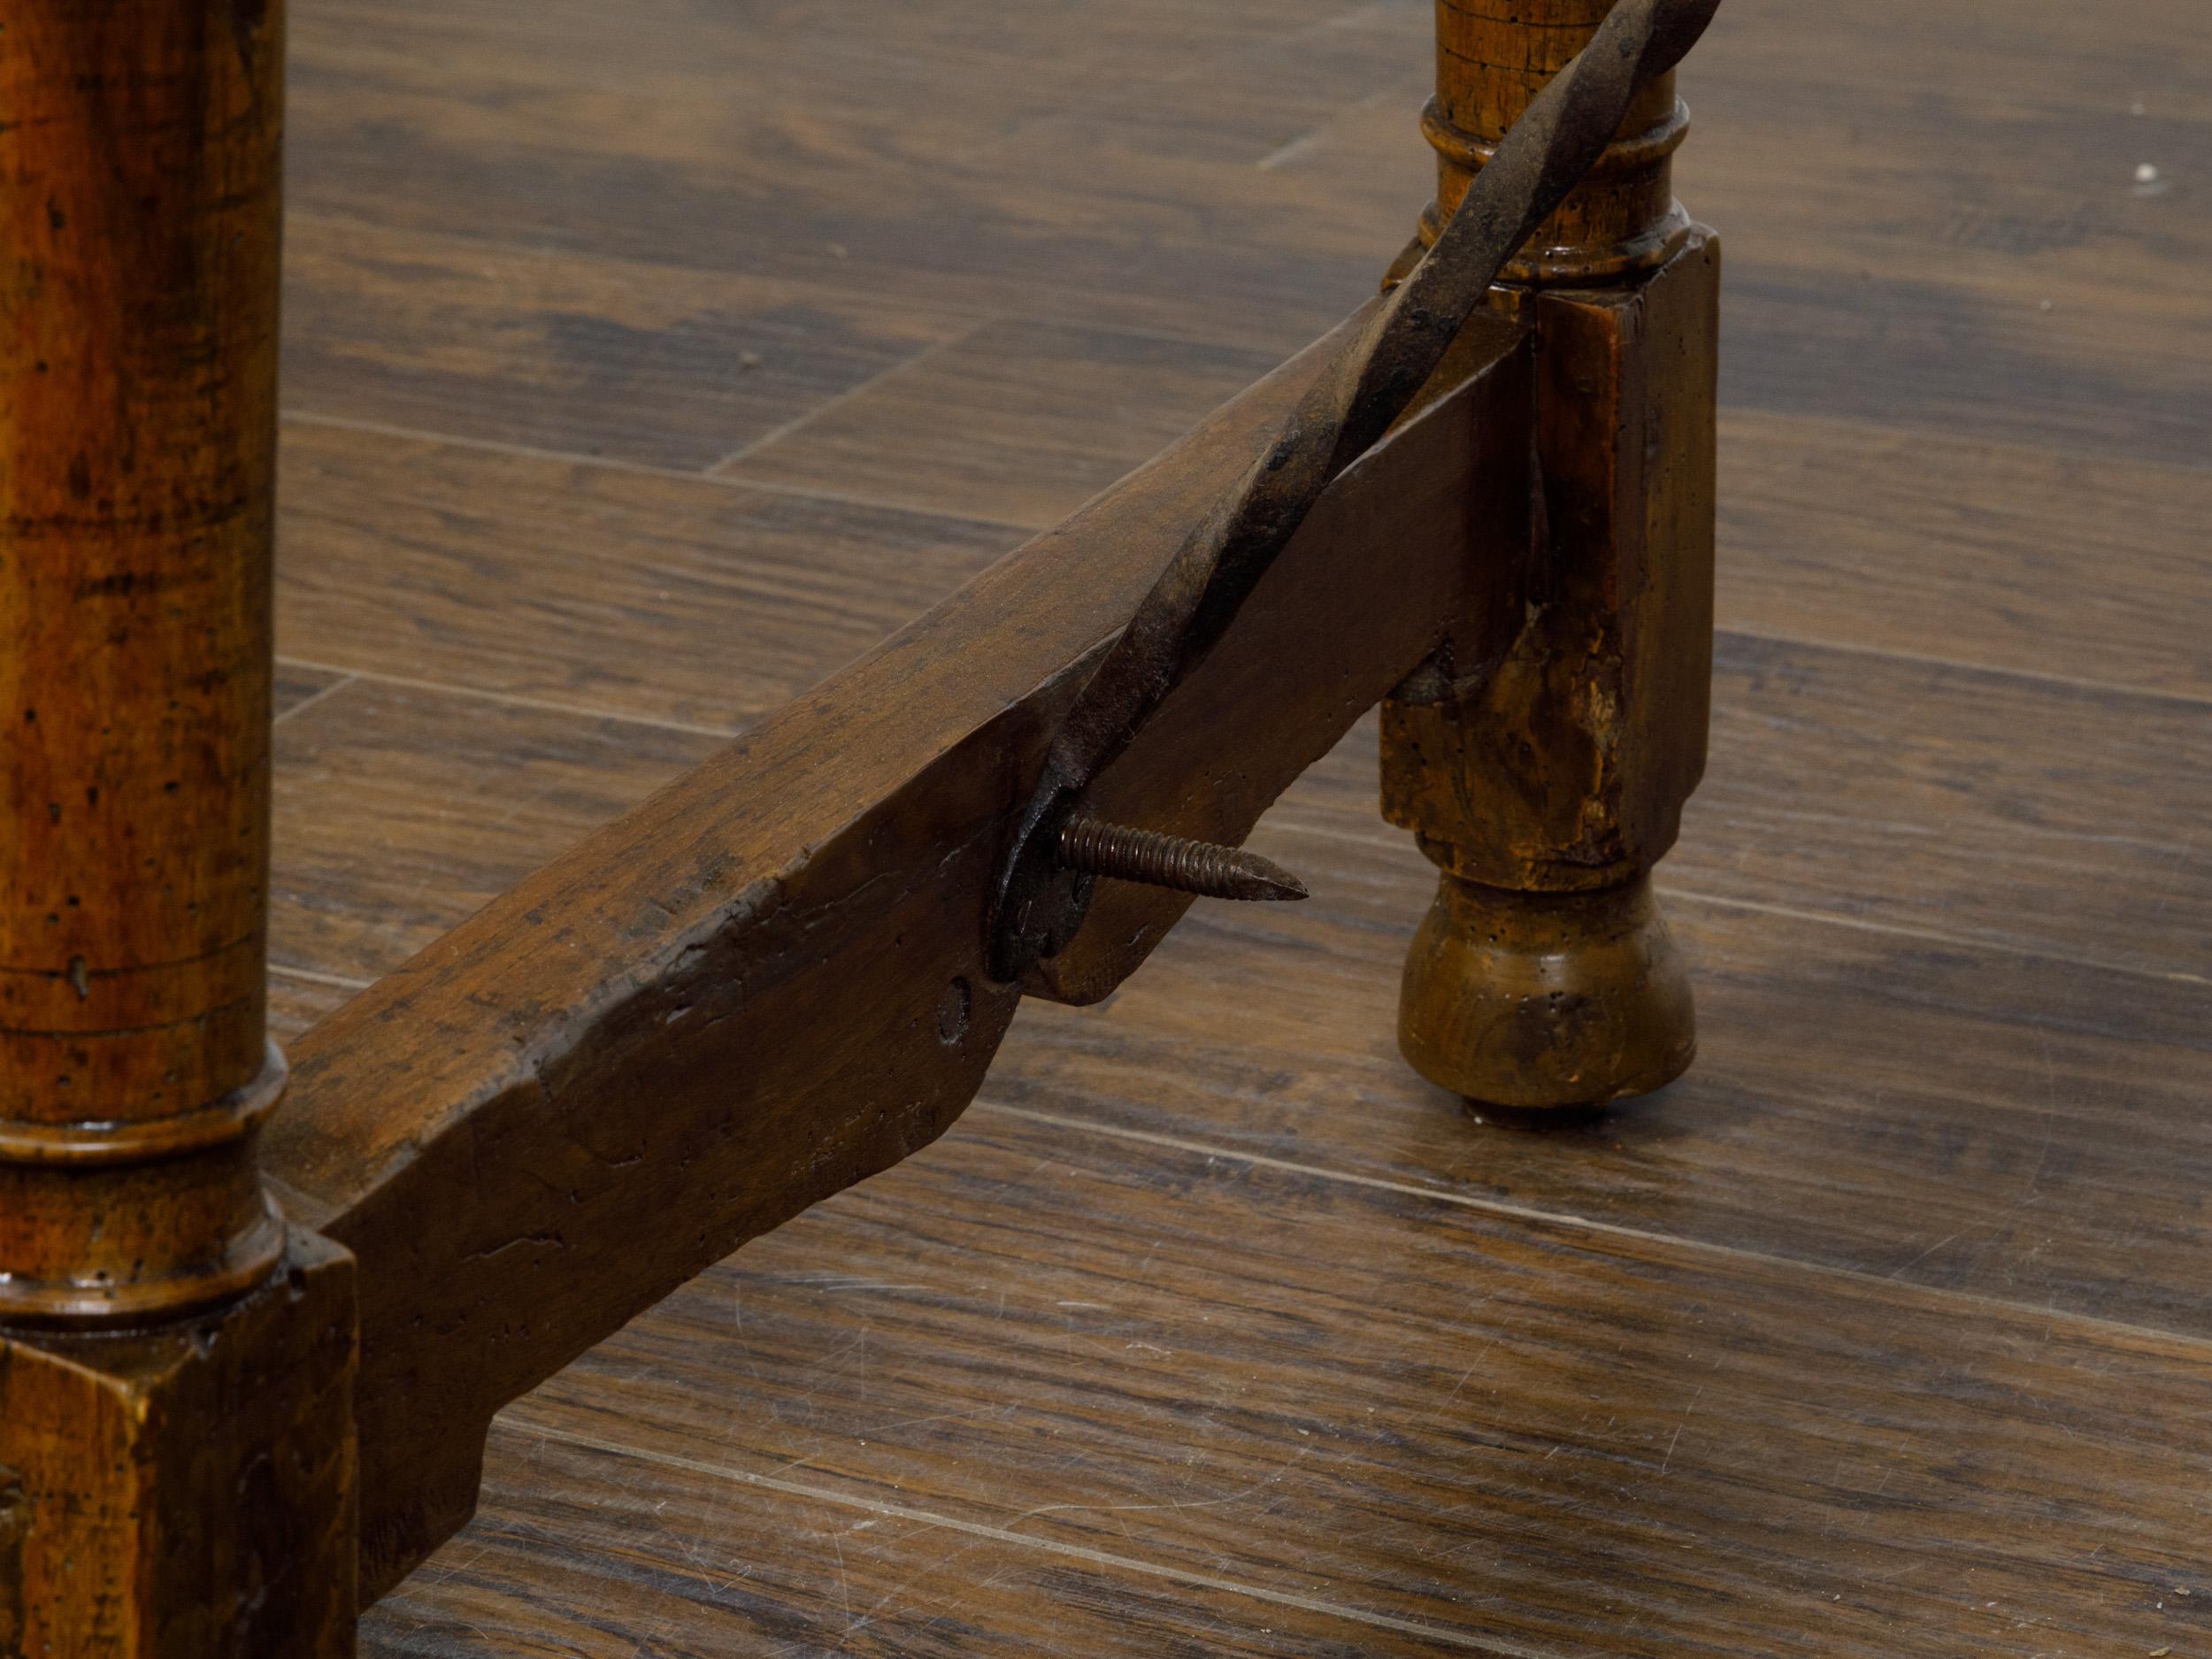 Italian 19th Century Walnut Console Table with Column Legs and Iron Stretchers For Sale 5